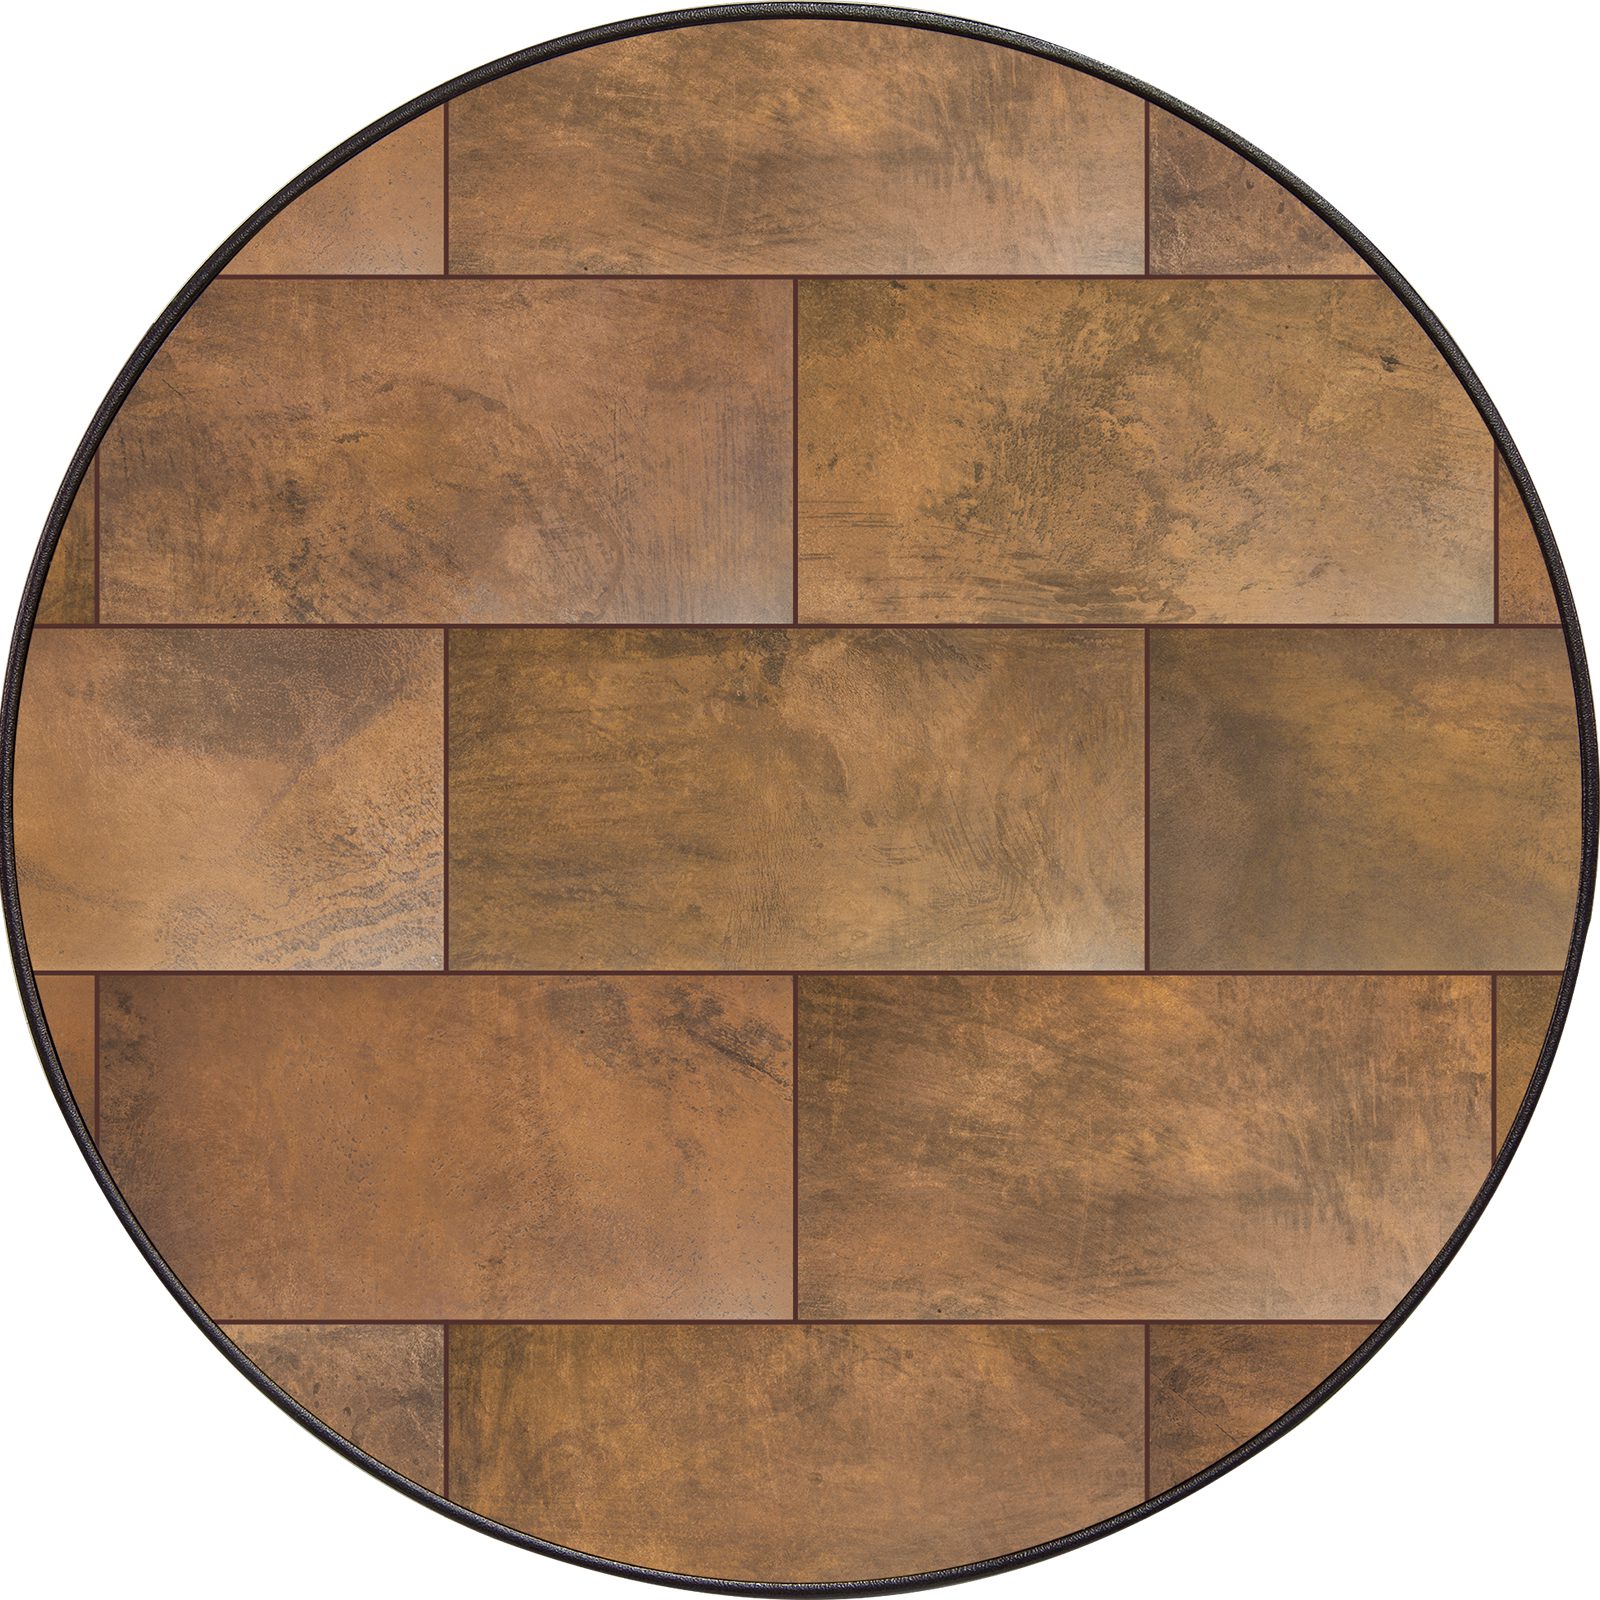 54" Round City Top - Porcelain Table Tops - City Series 35